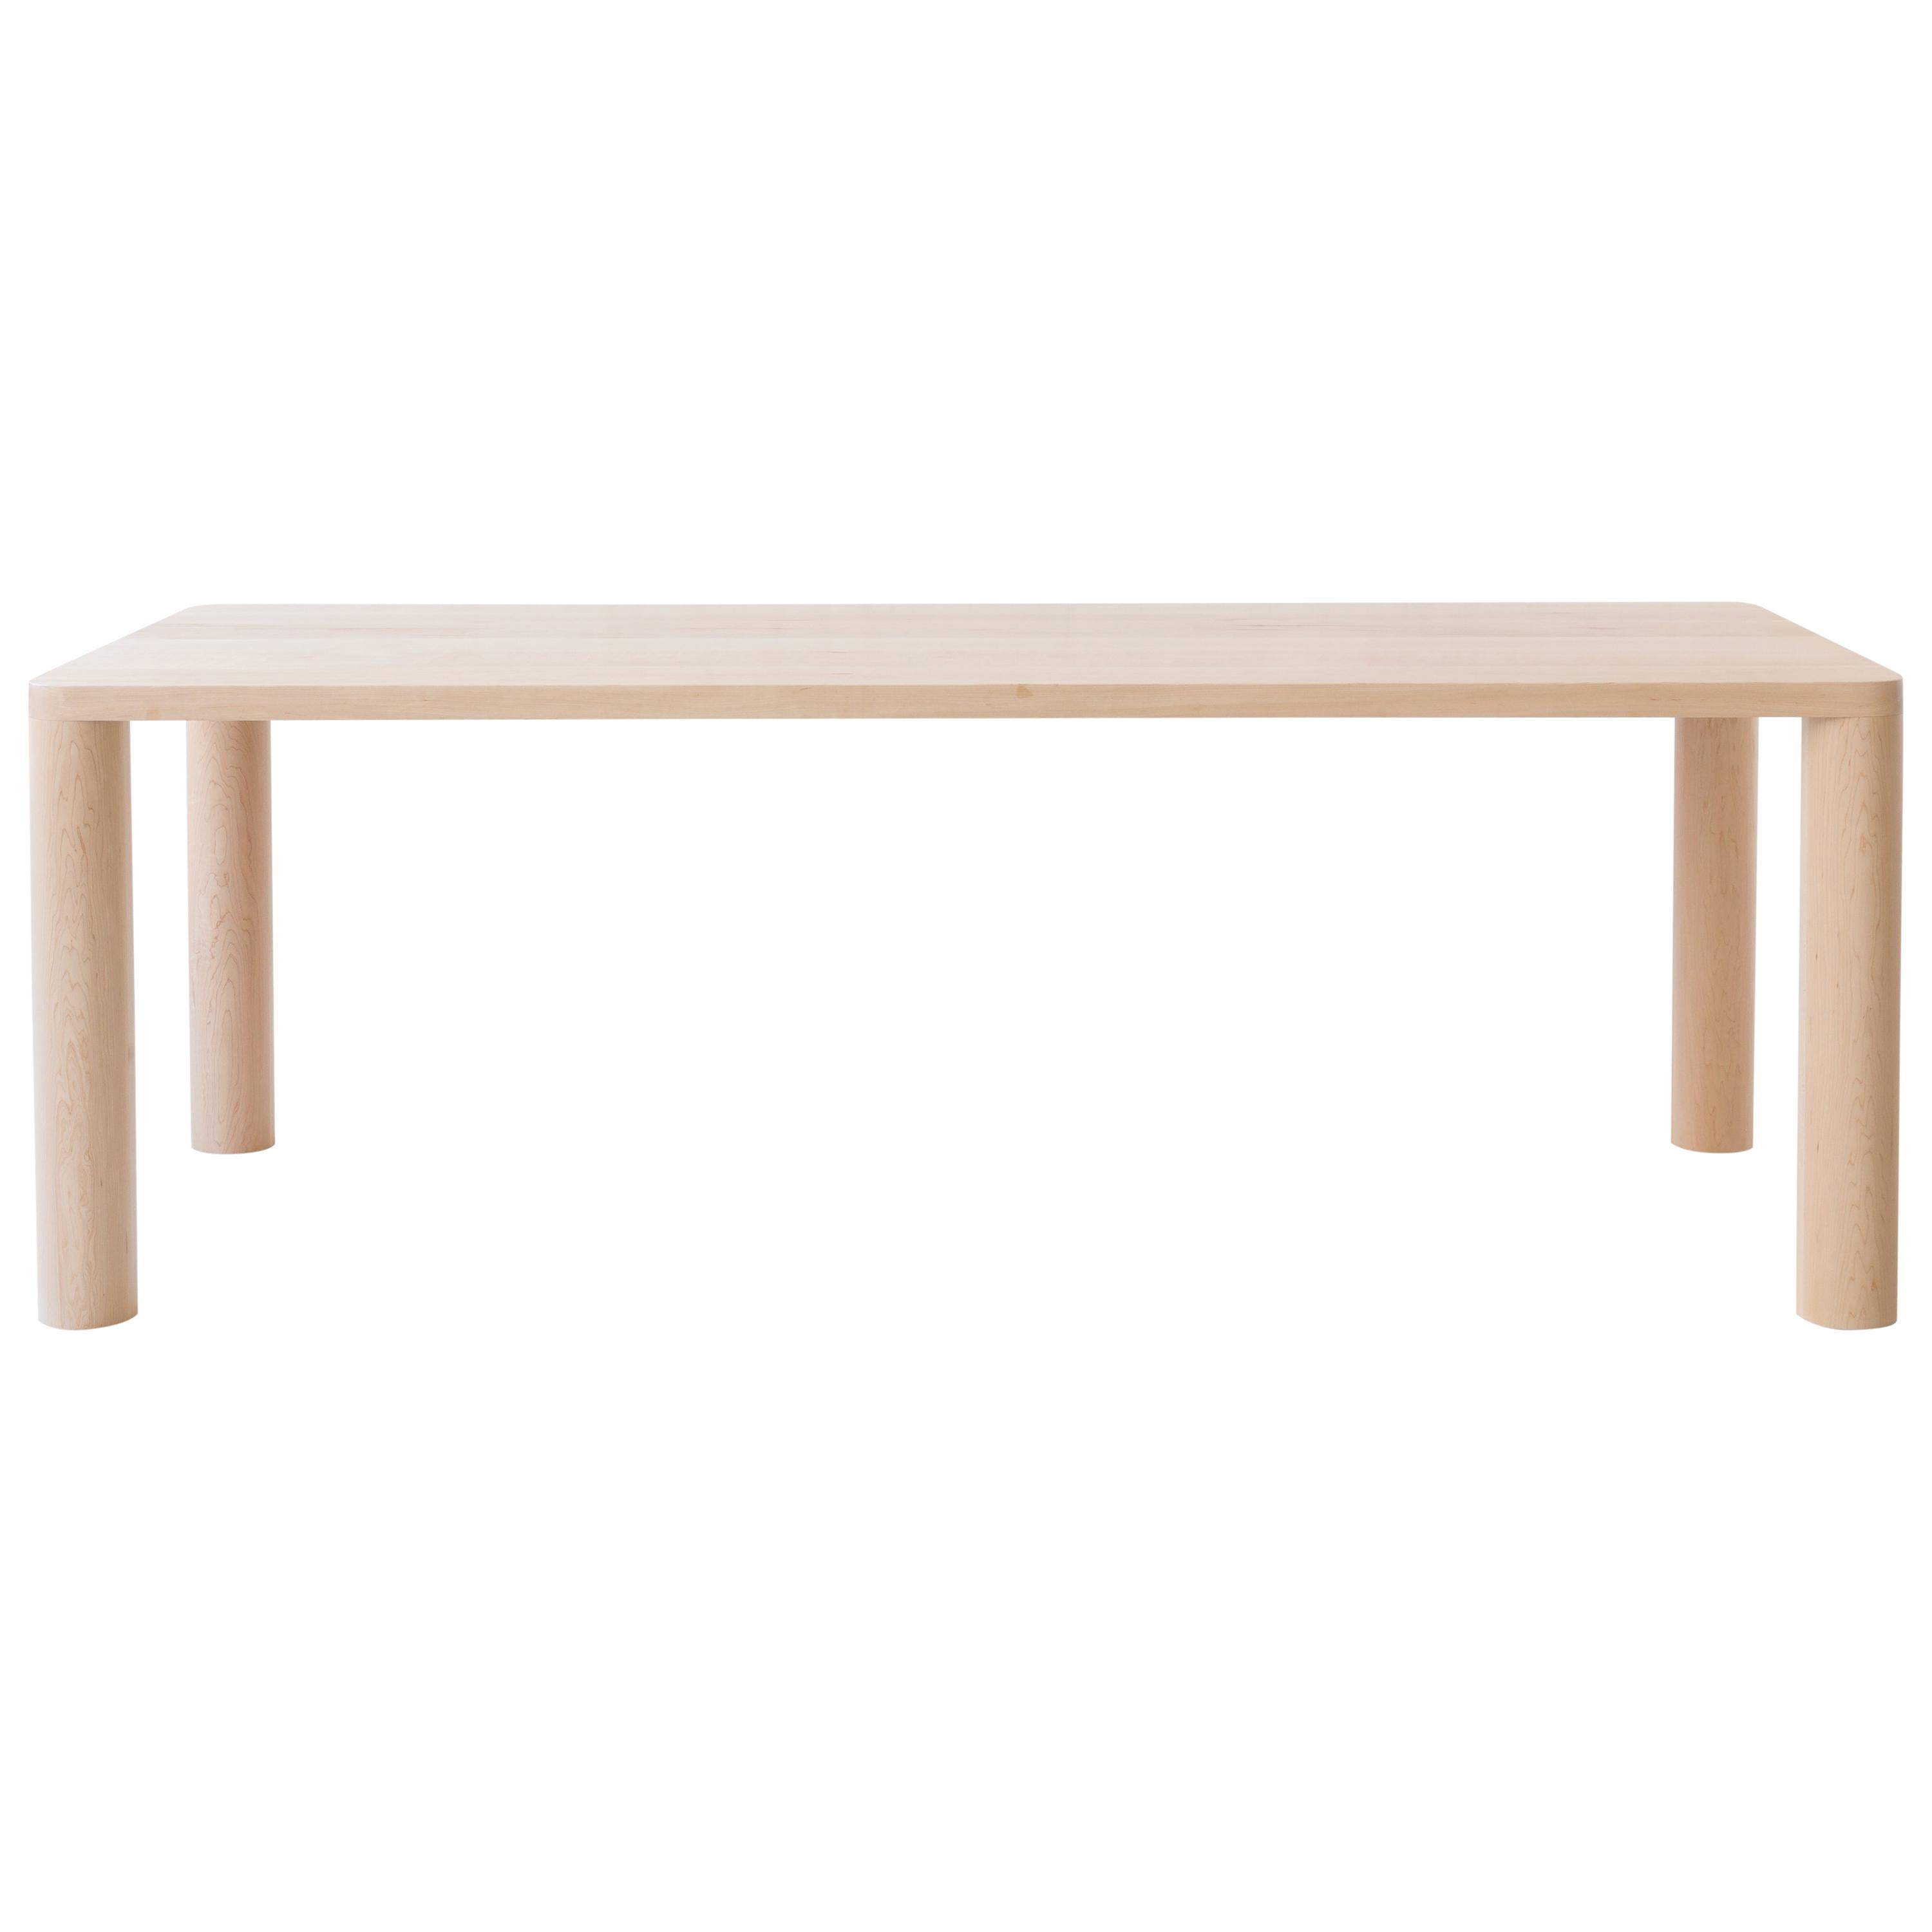 Contemporary Wood Corner Leg Column Dining Table in White Oak by Fort Standard